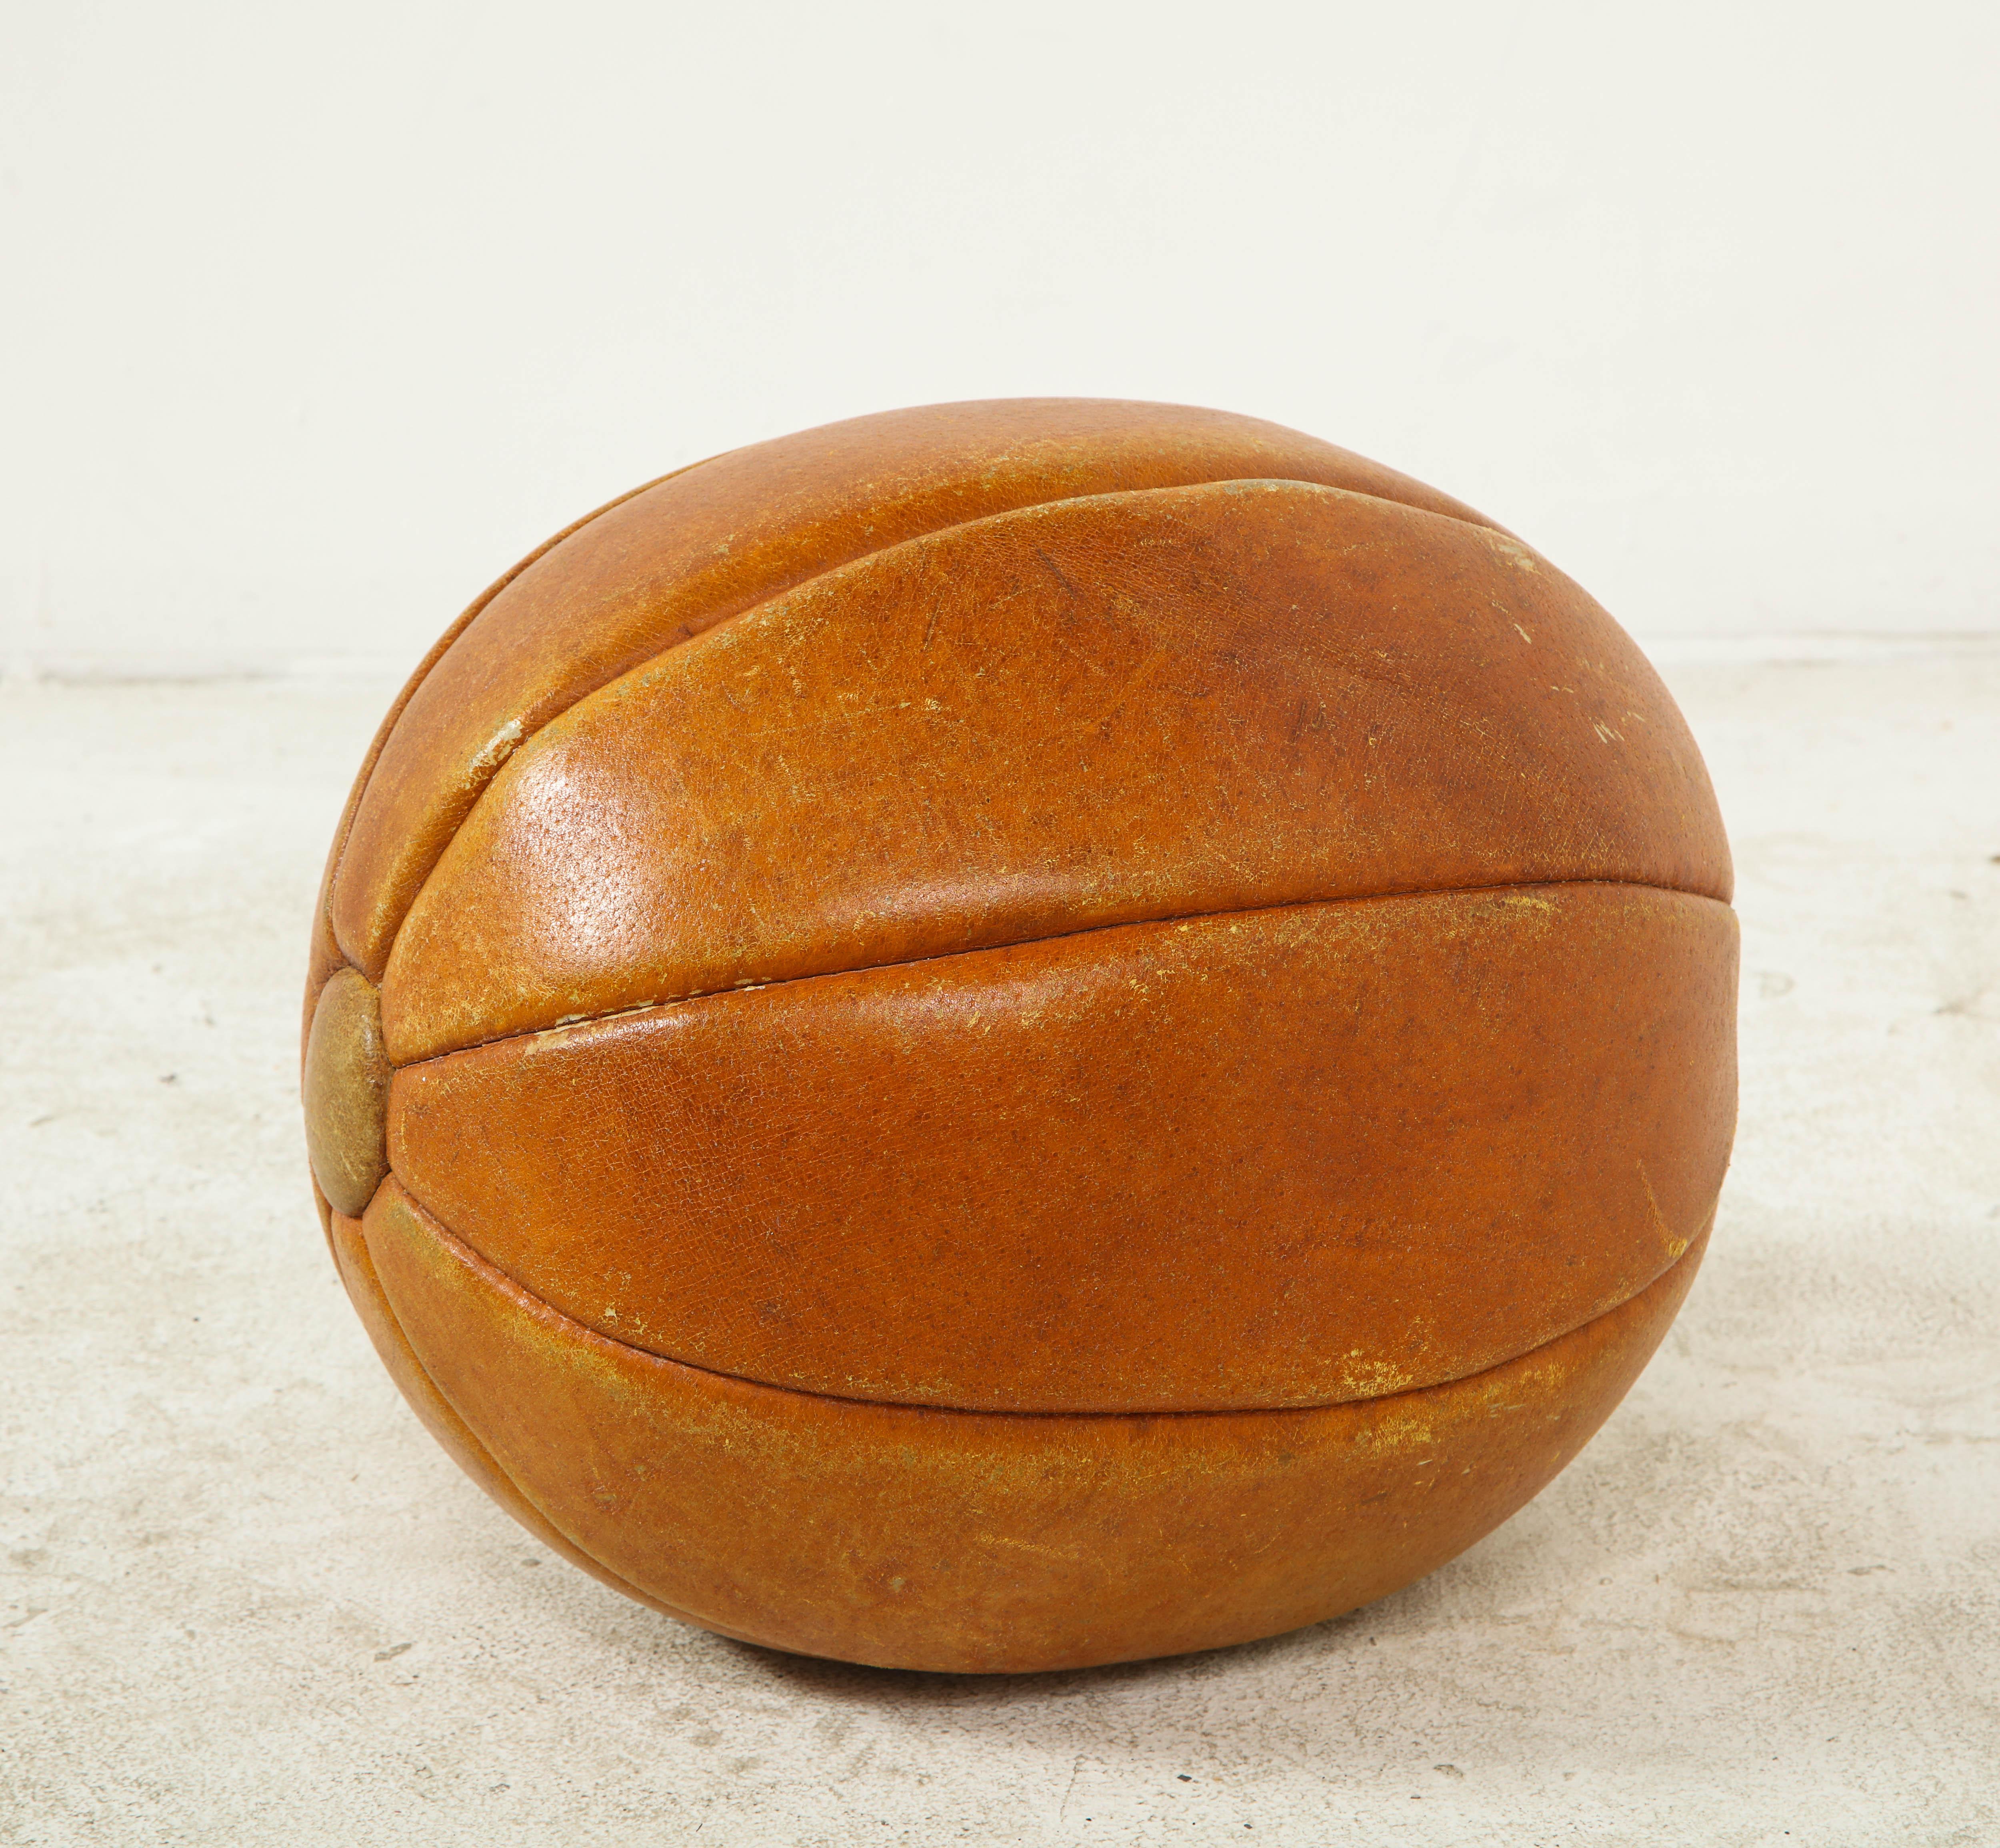 Early 20th century English leather ball. Slightly elongated with button ends.